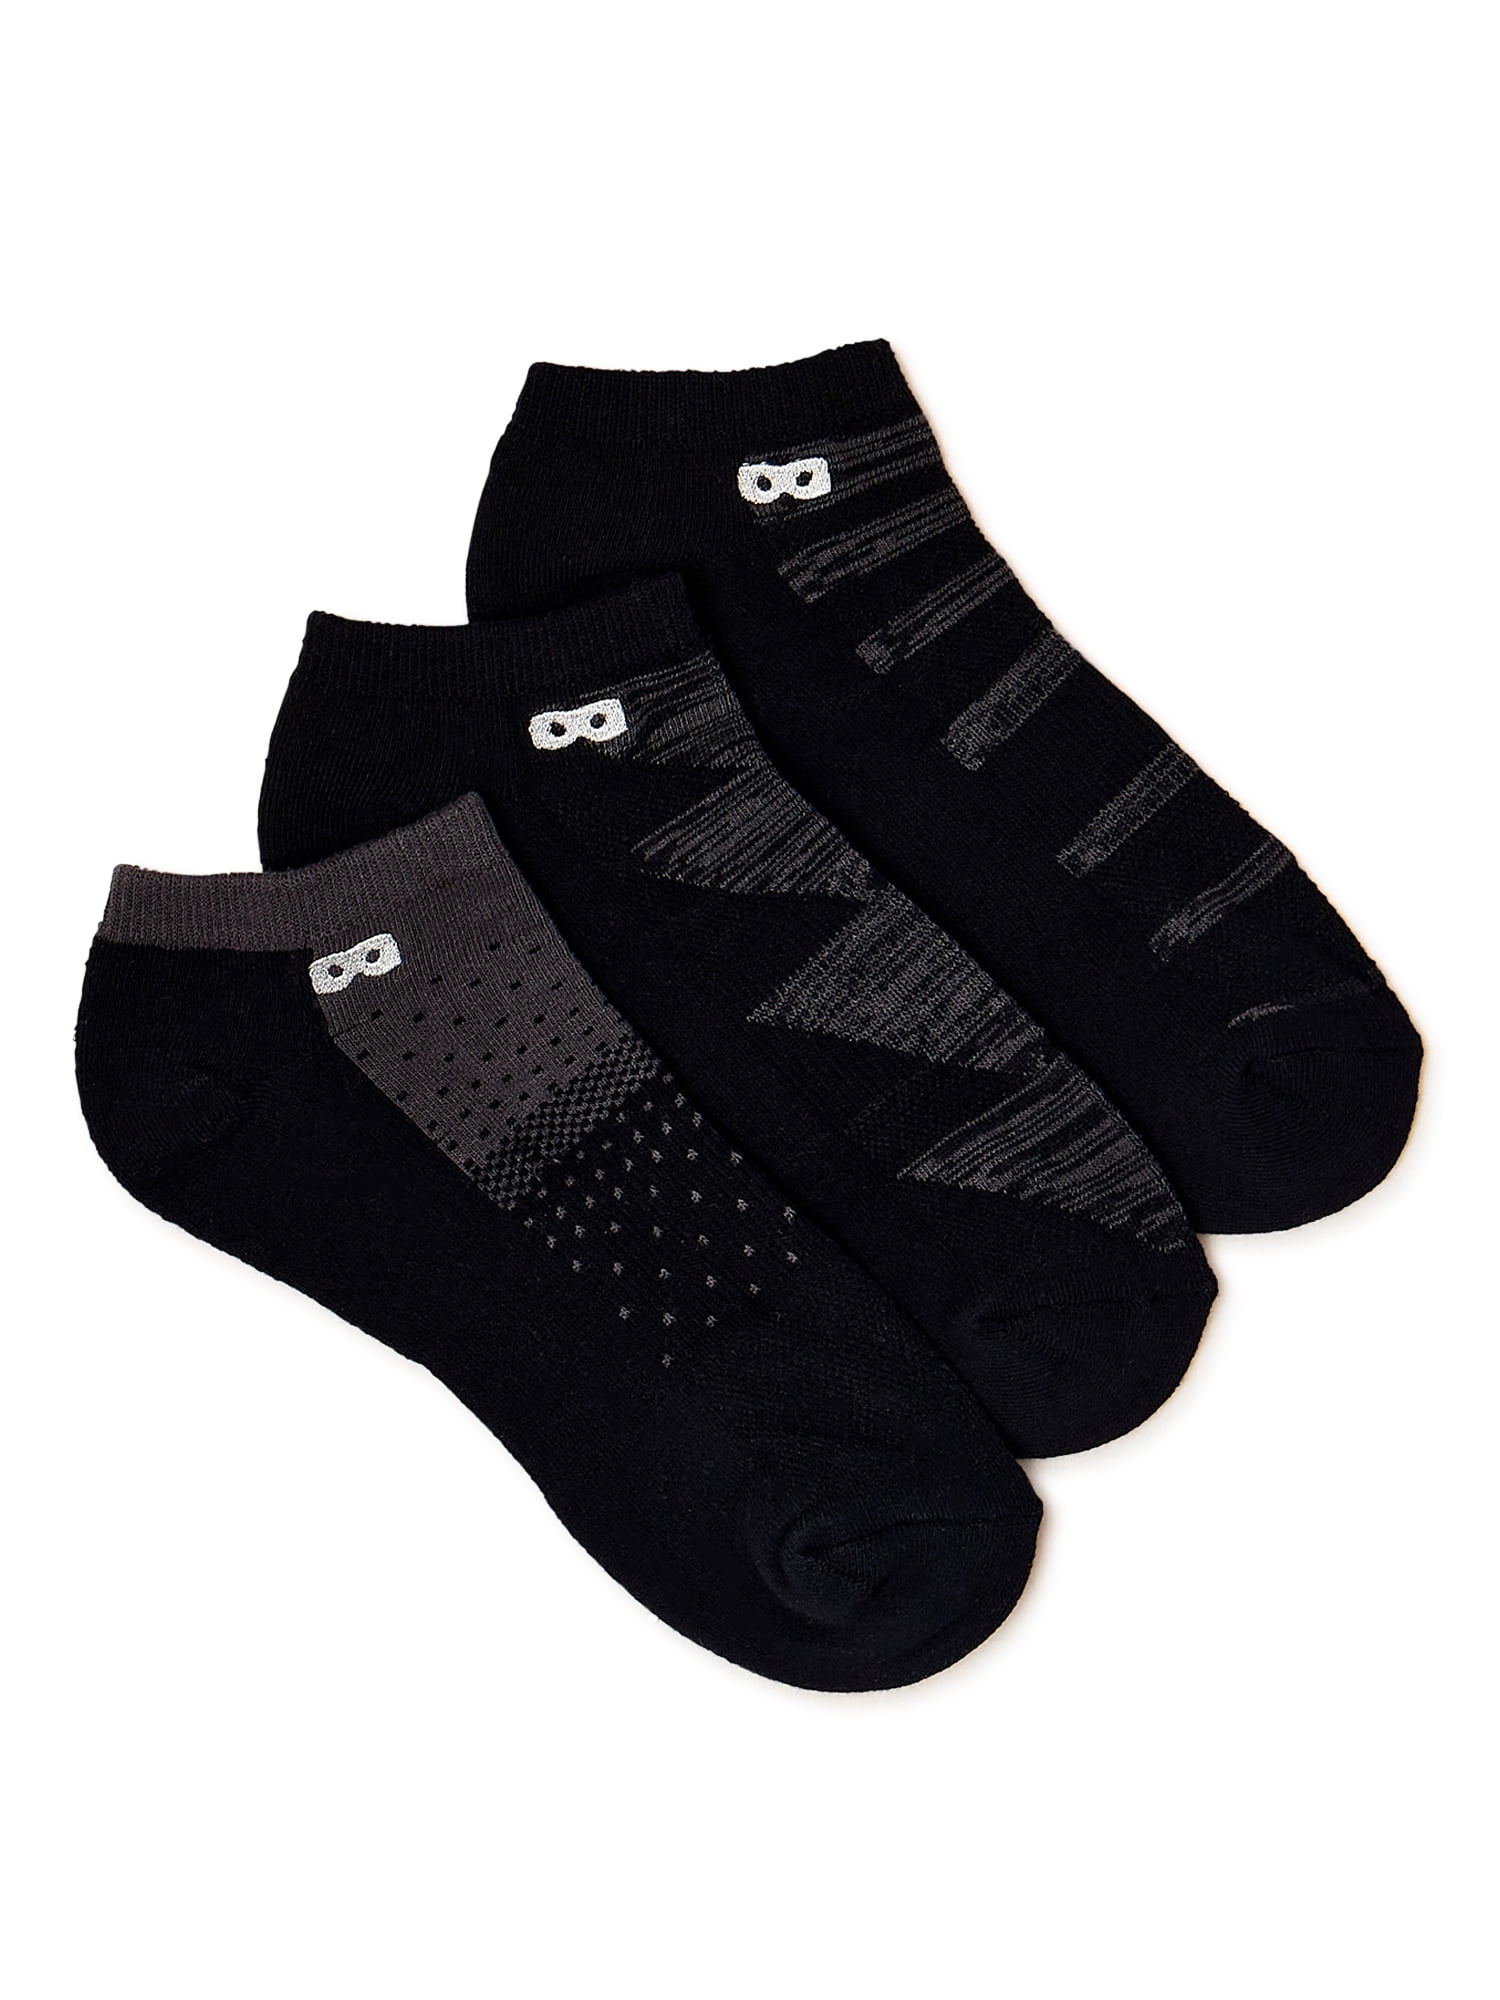 Pair of Thieves Blackout/Whiteout Cushioned Low Cut Socks, 3-Pack -  Walmart.com